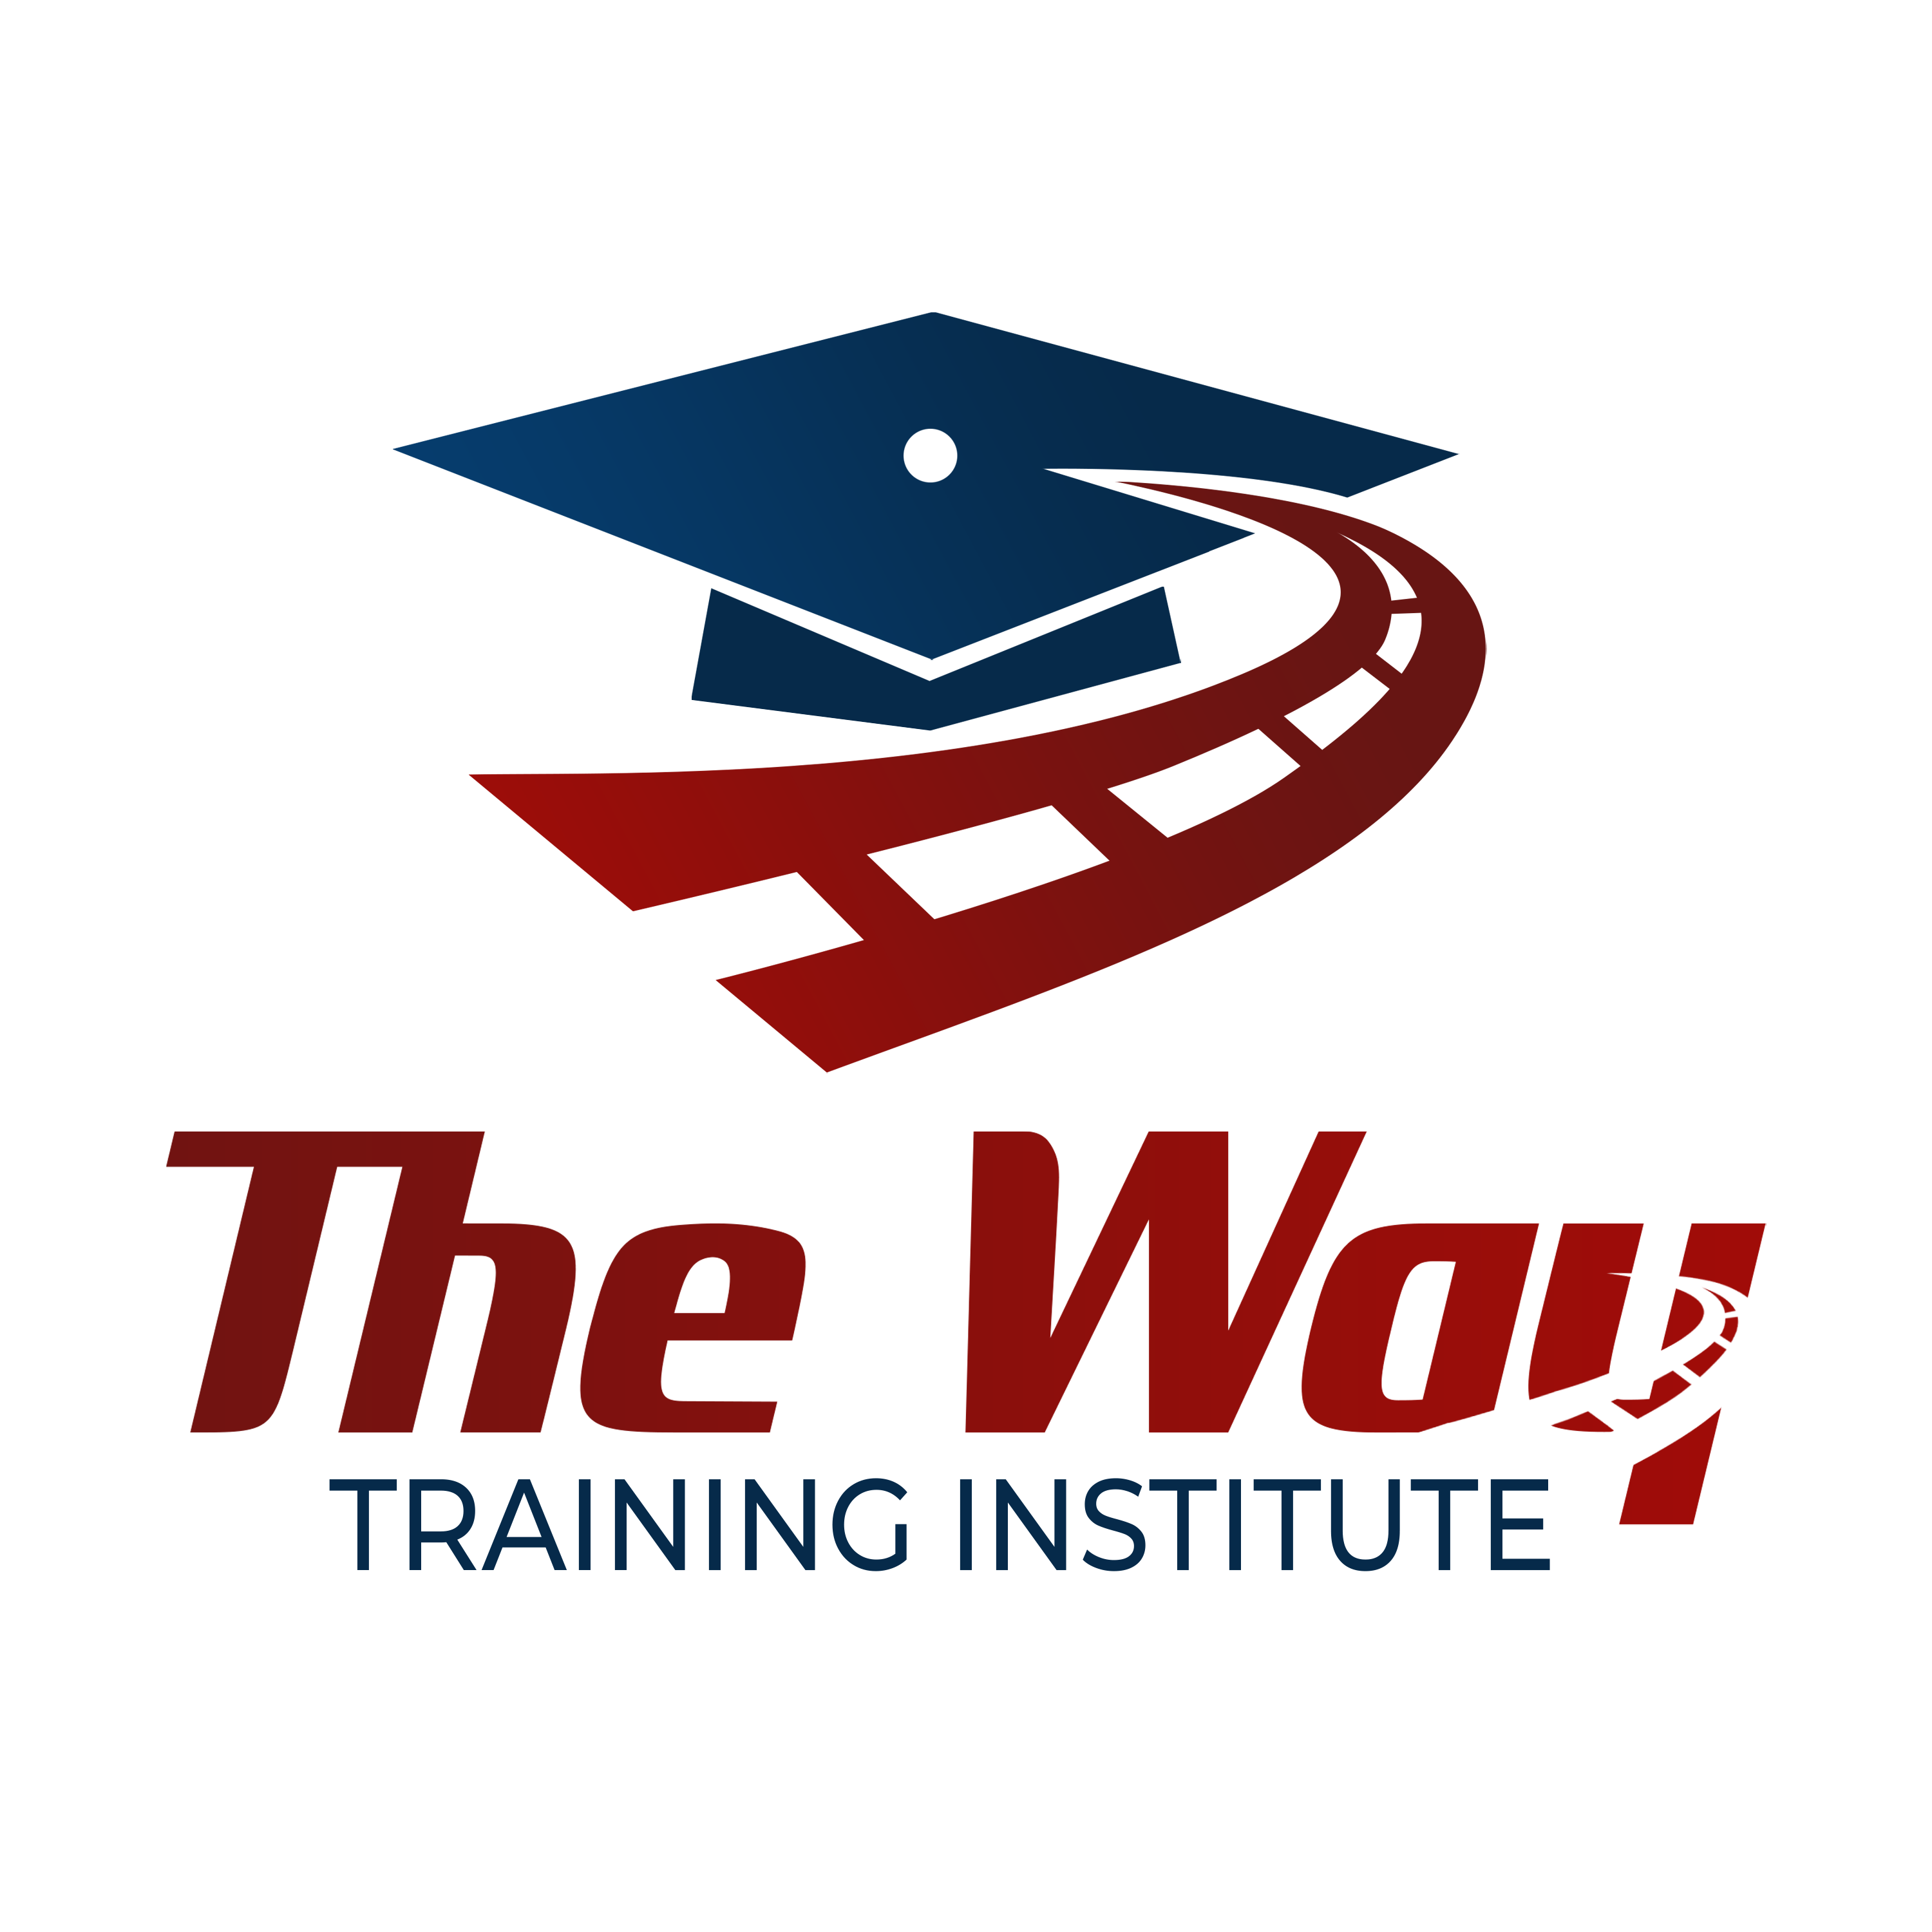 More about The Way Training Institute